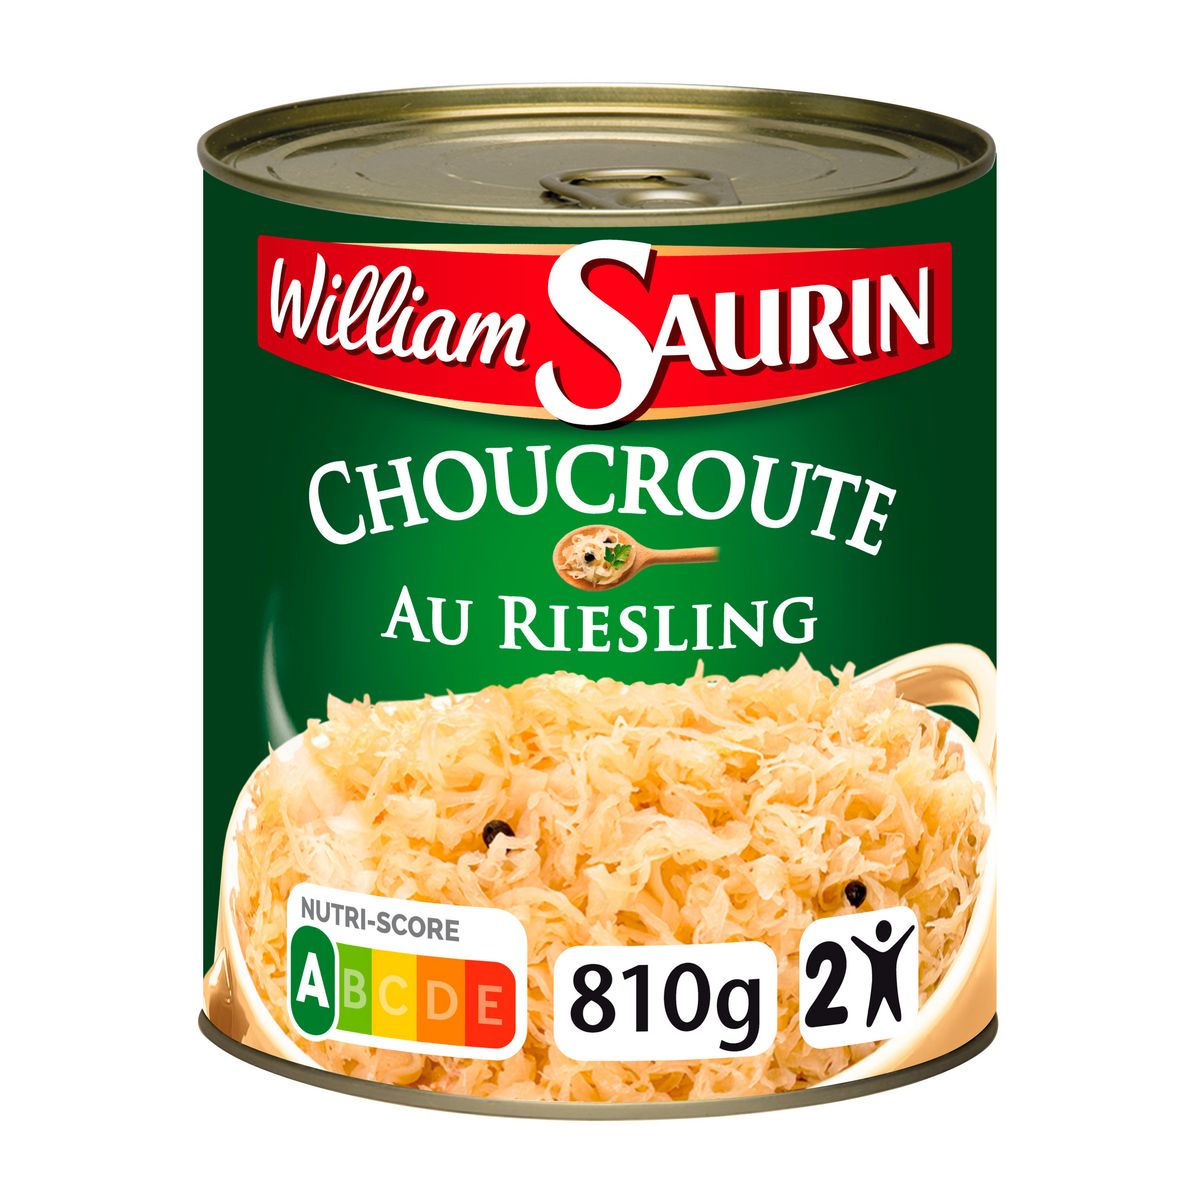 WILLIAM SAURIN Choucroute cuisinée au Riesling 810g